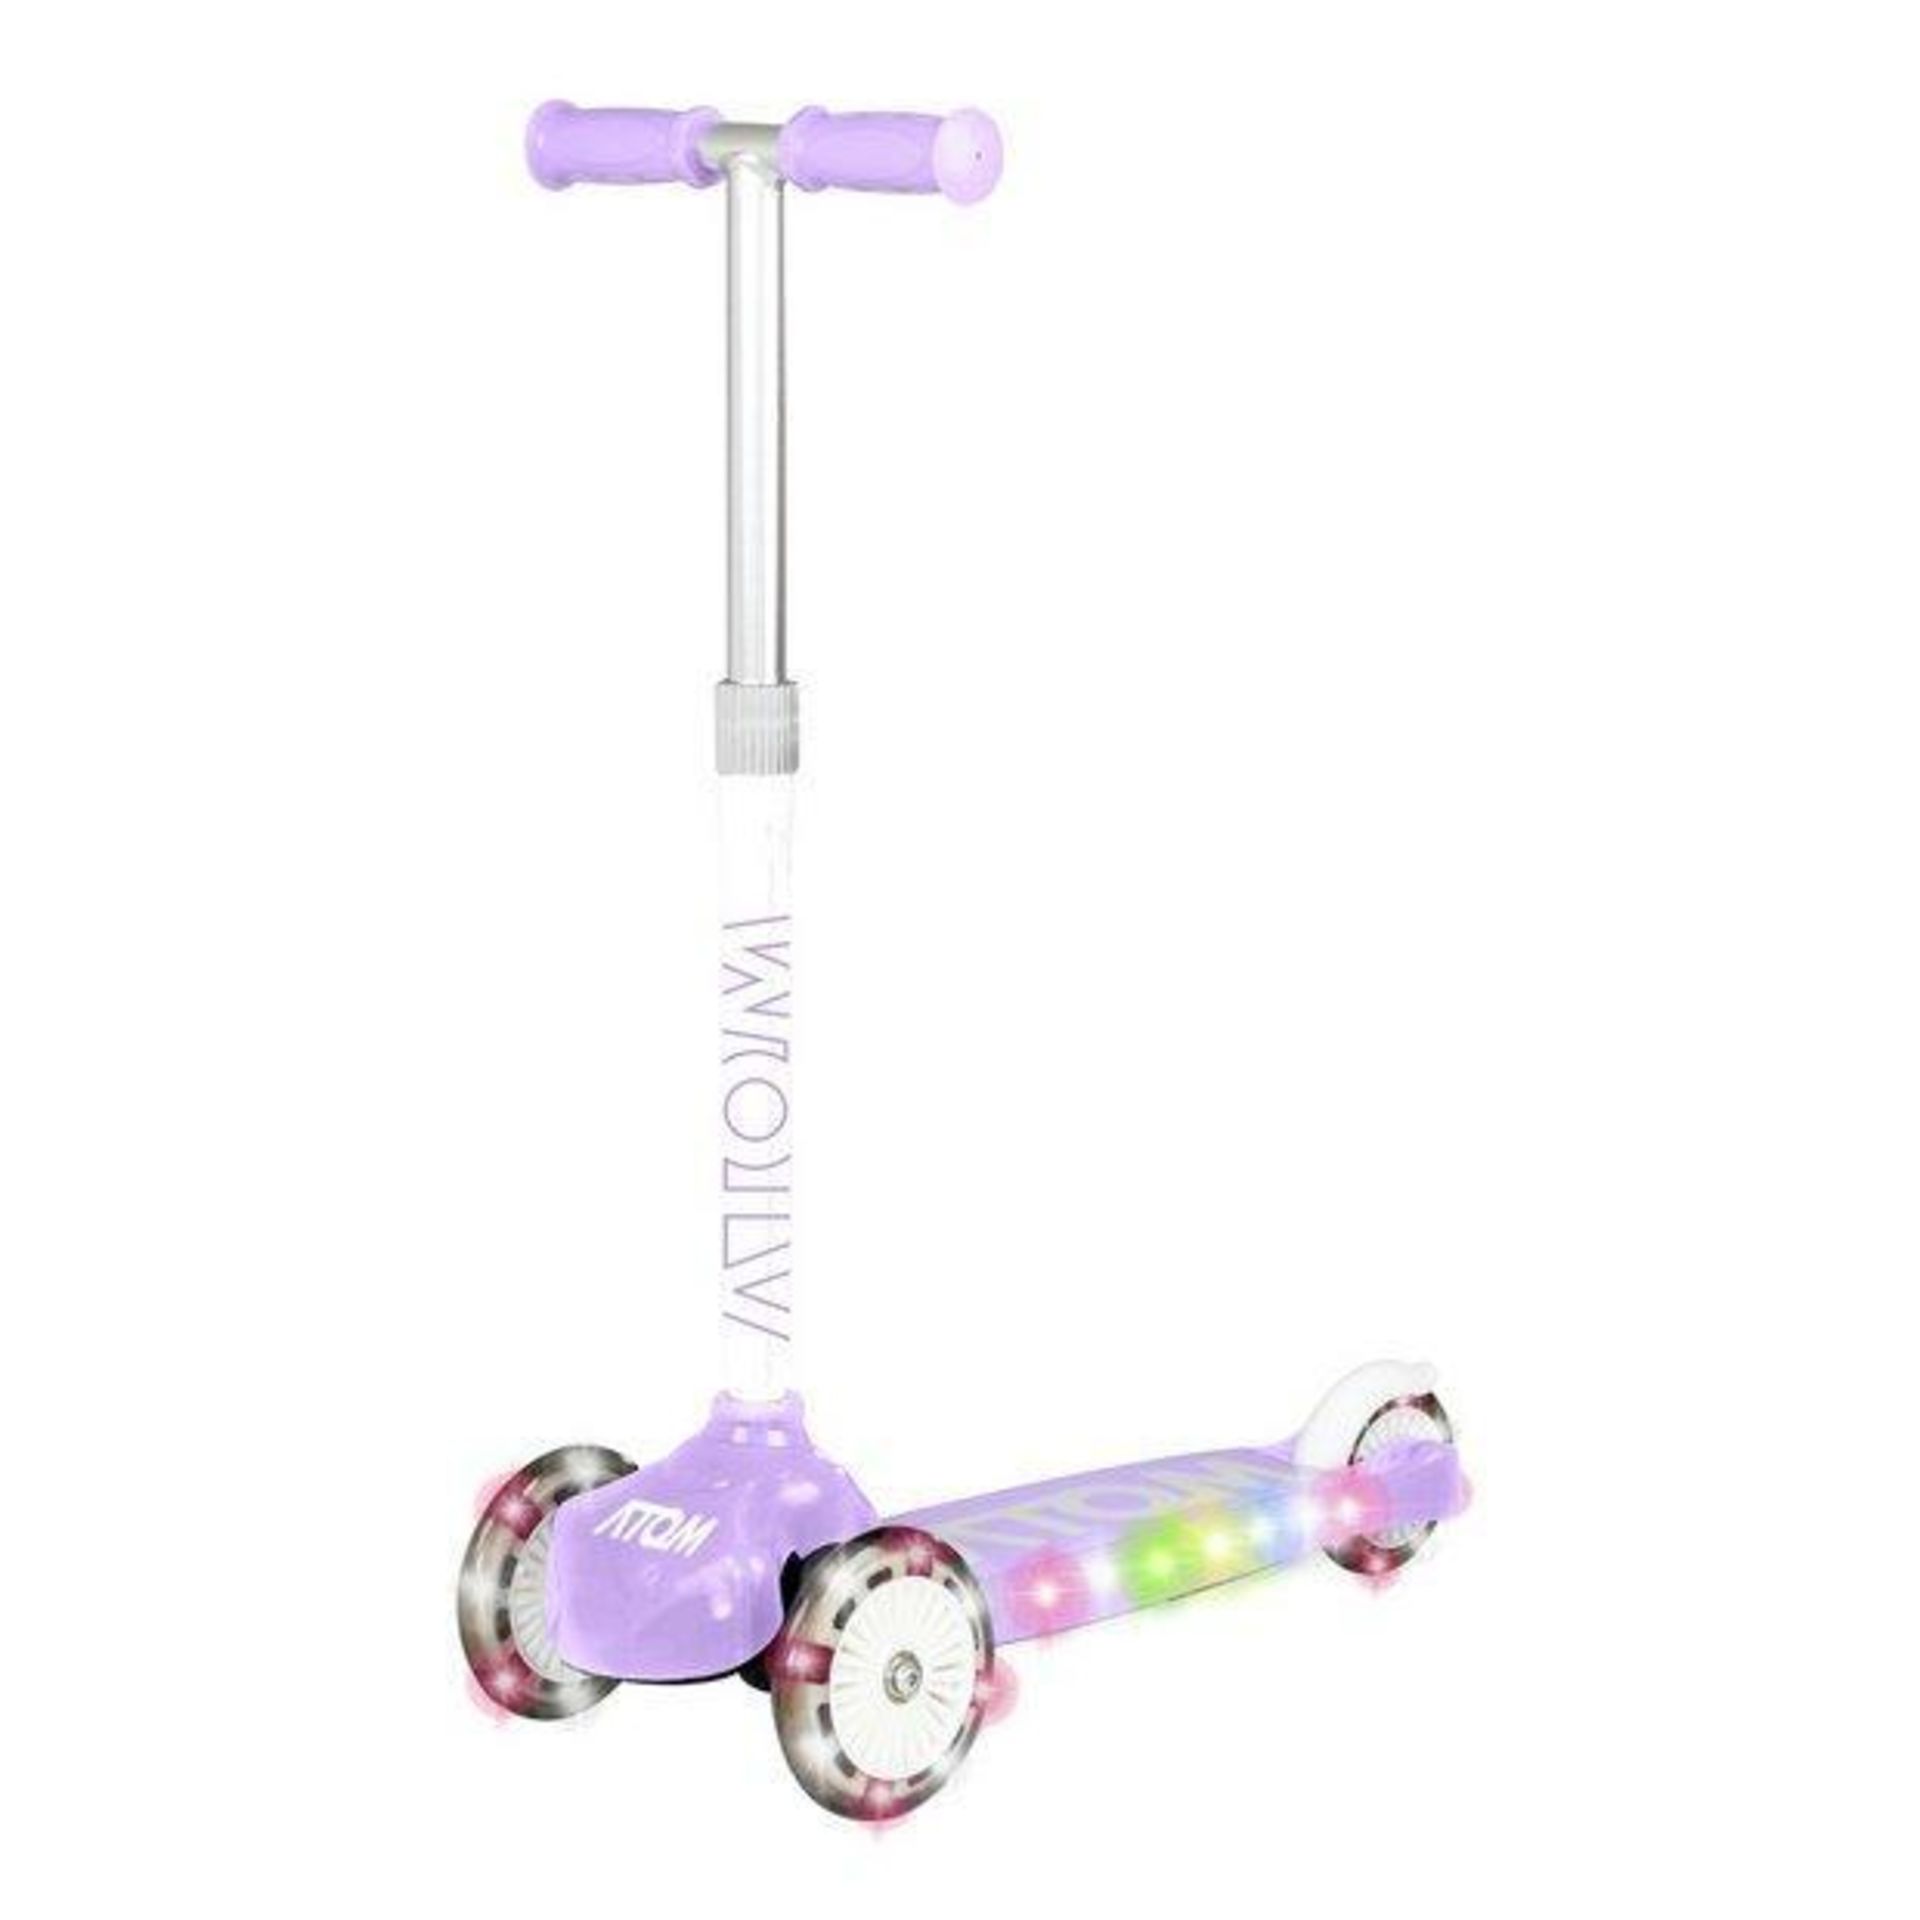 Atom Light Up Tri Scooter - £24.99 RRP